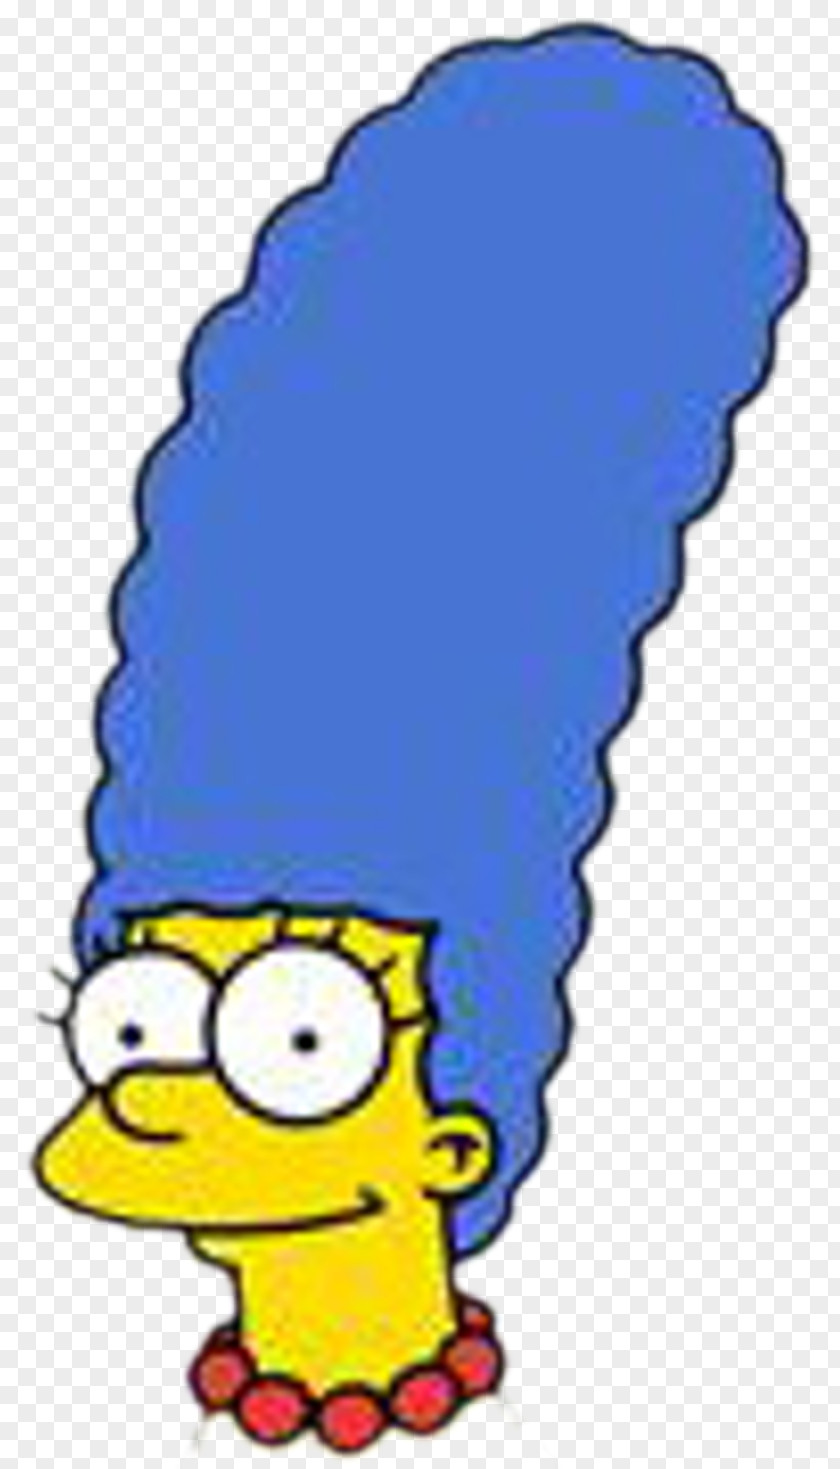 The Simpsons Marge Simpson Bart Homer Lisa Ned Flanders PNG